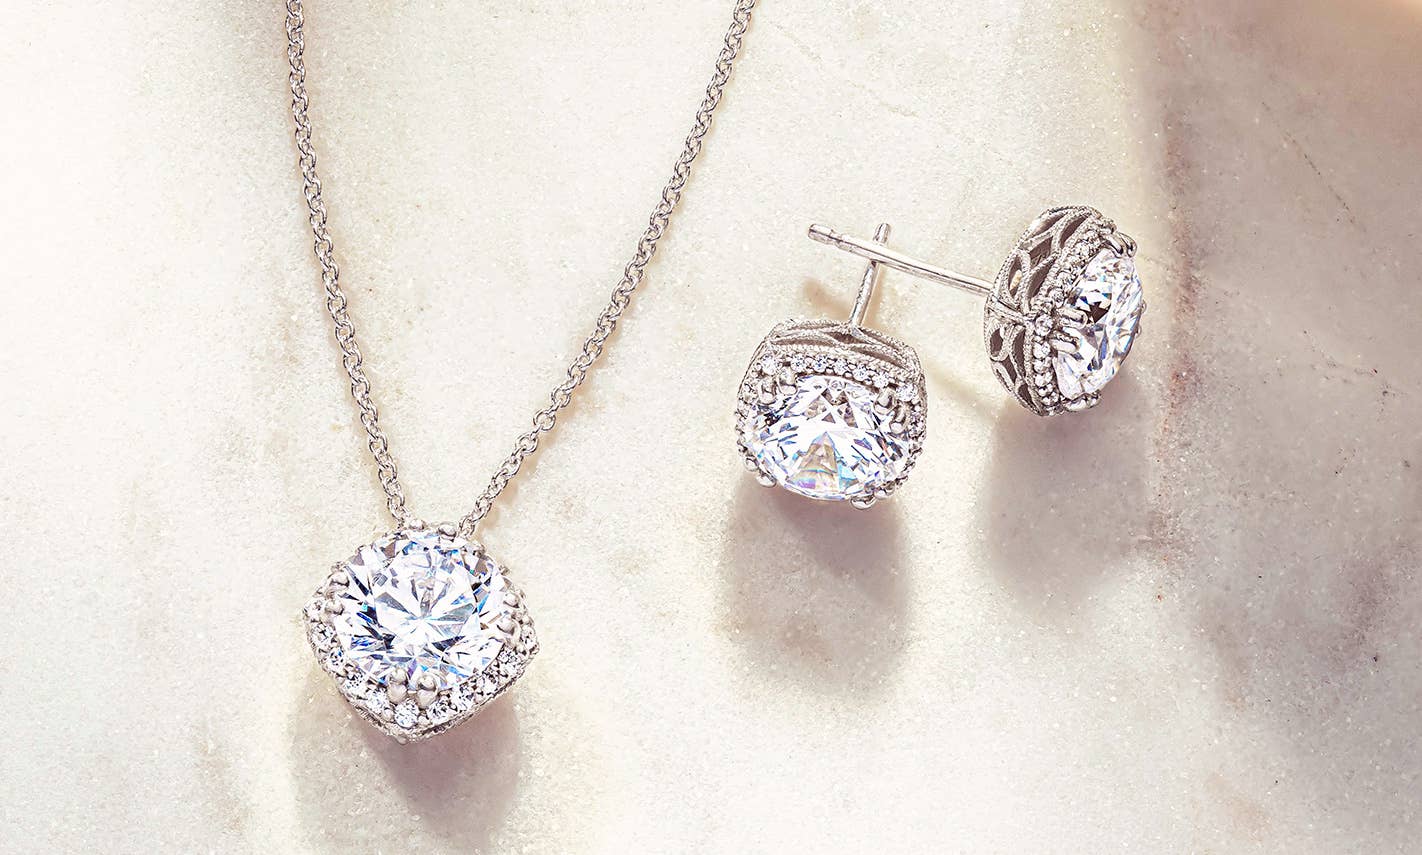 TACORI Bloom necklace and earrings